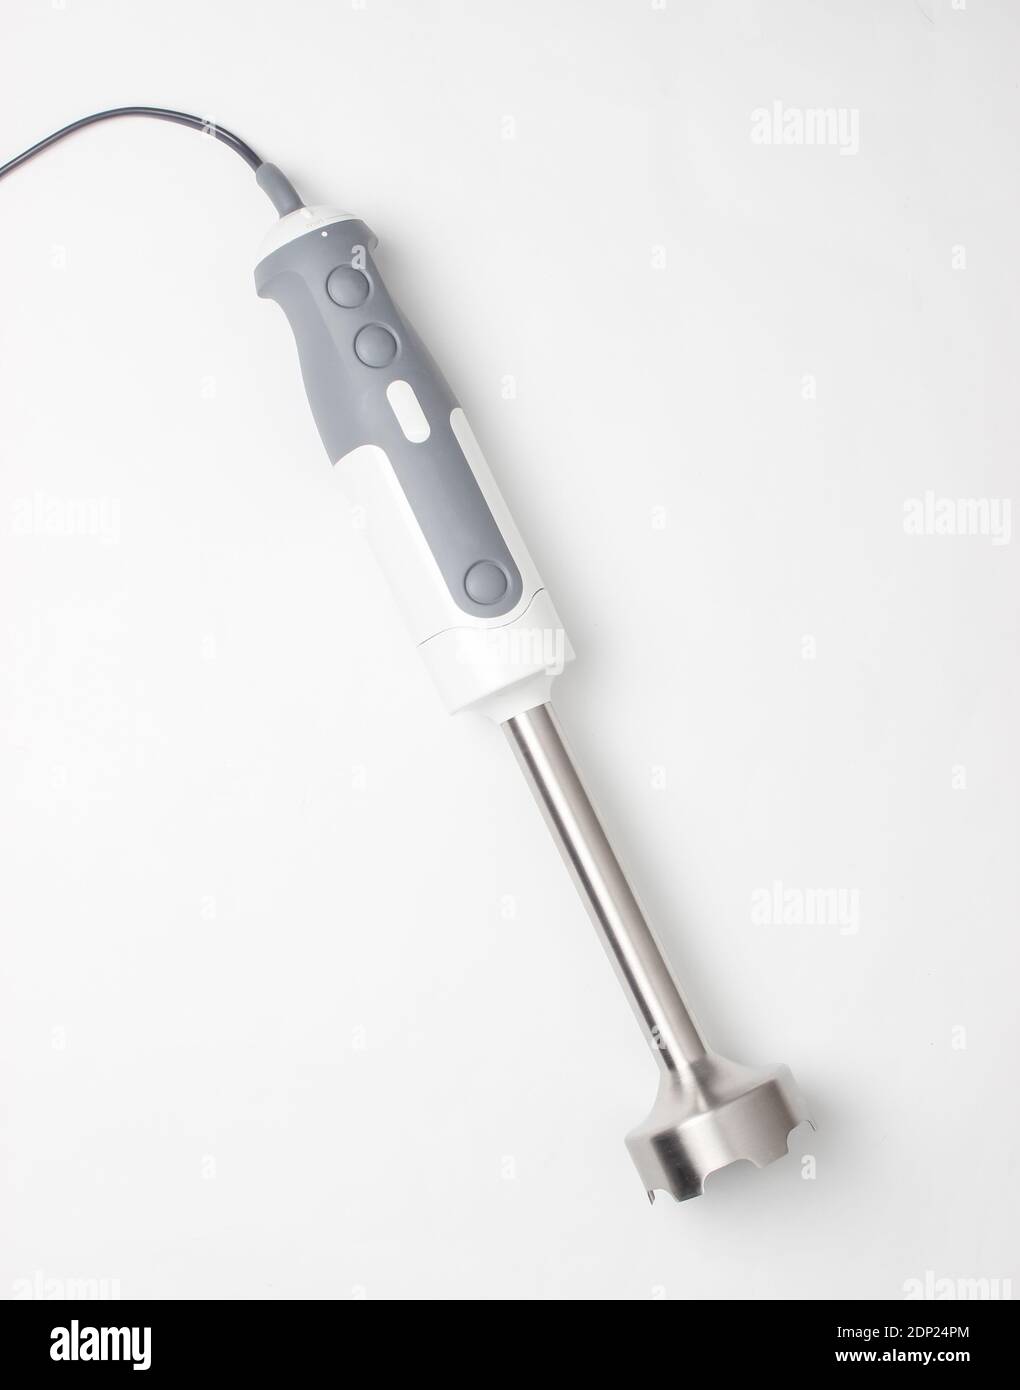 Electric hand blender on white background. Top view Stock Photo